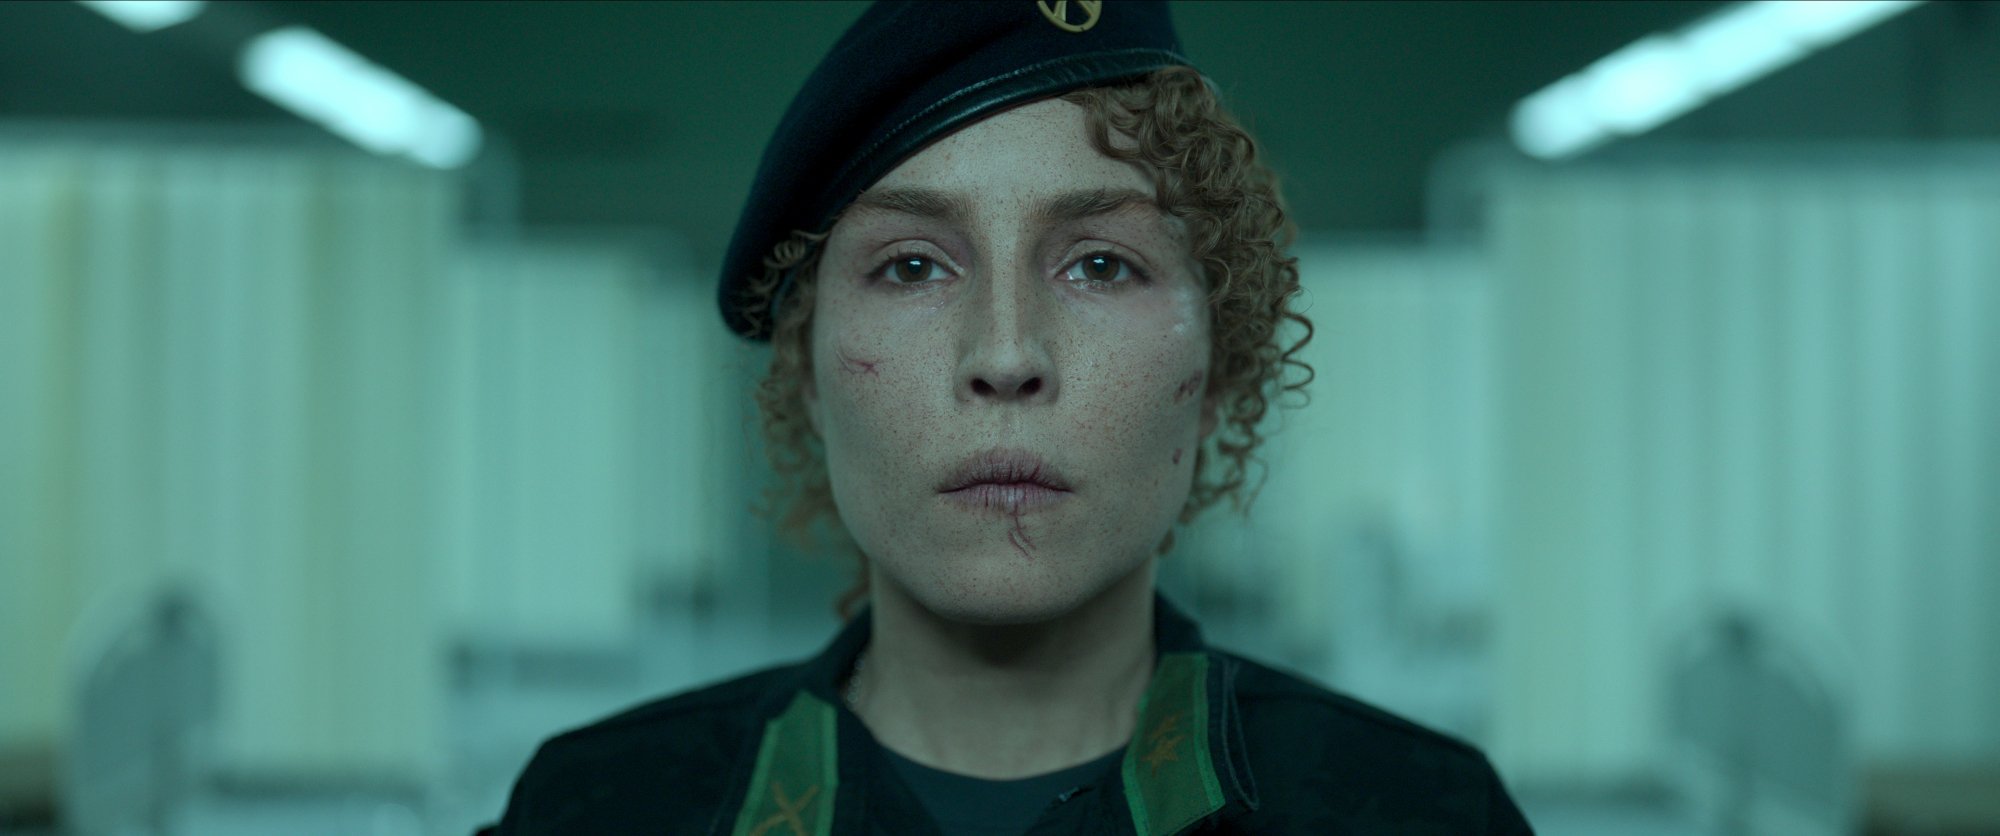 Black Crab Movie Review Noomi Rapace Delivers In Solid Netflix Thriller 0950